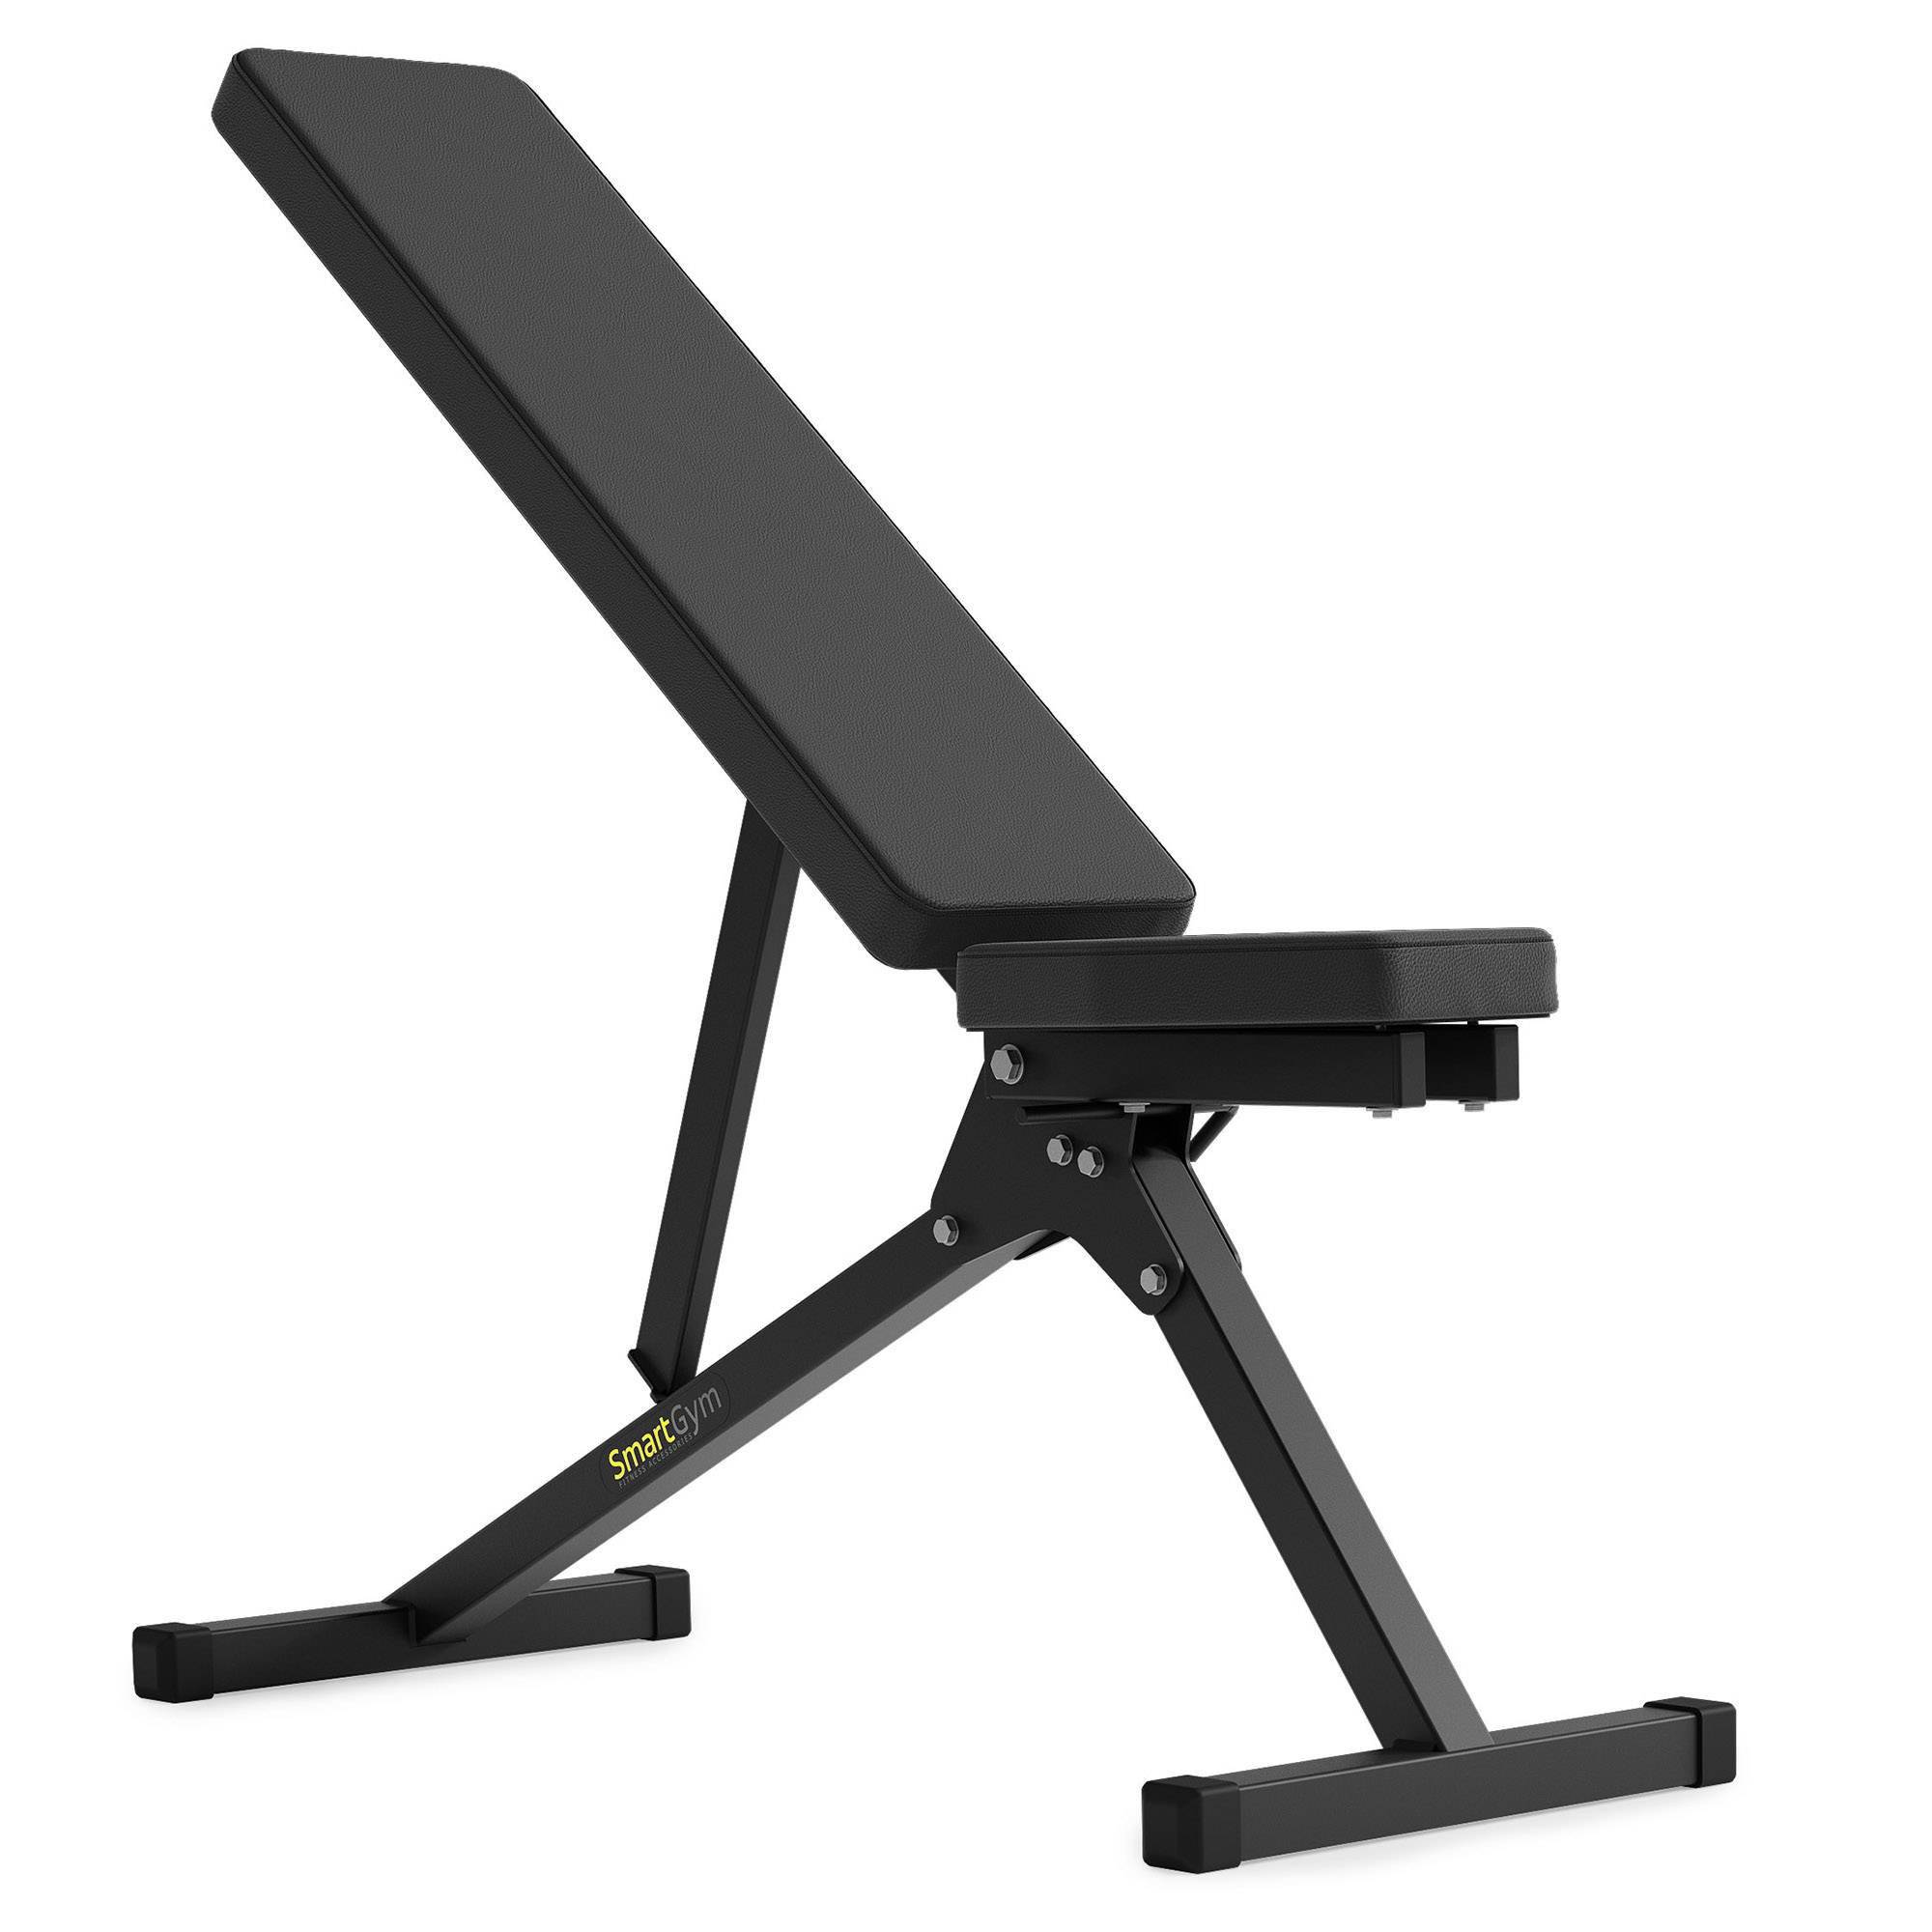 Adjustable bench SG-11 - SmartGym Fitness Accessories, Strength equipment  \ Training benches \ Benches